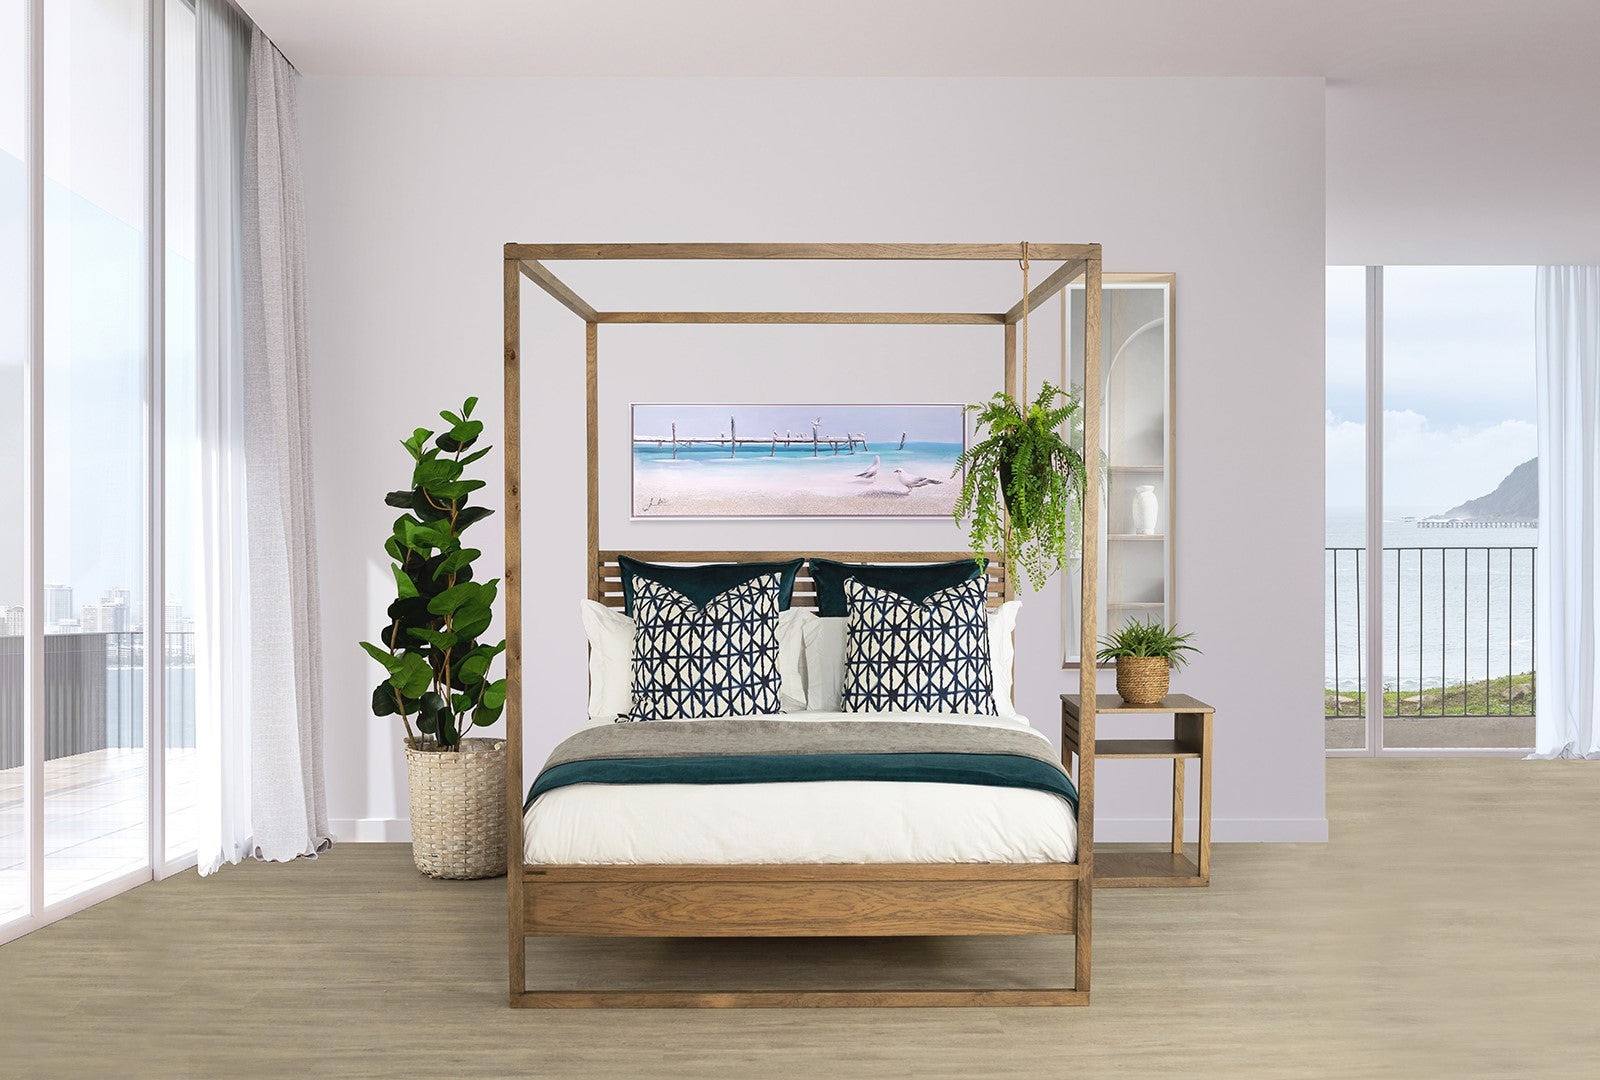 Wood or metal: the better bed frame